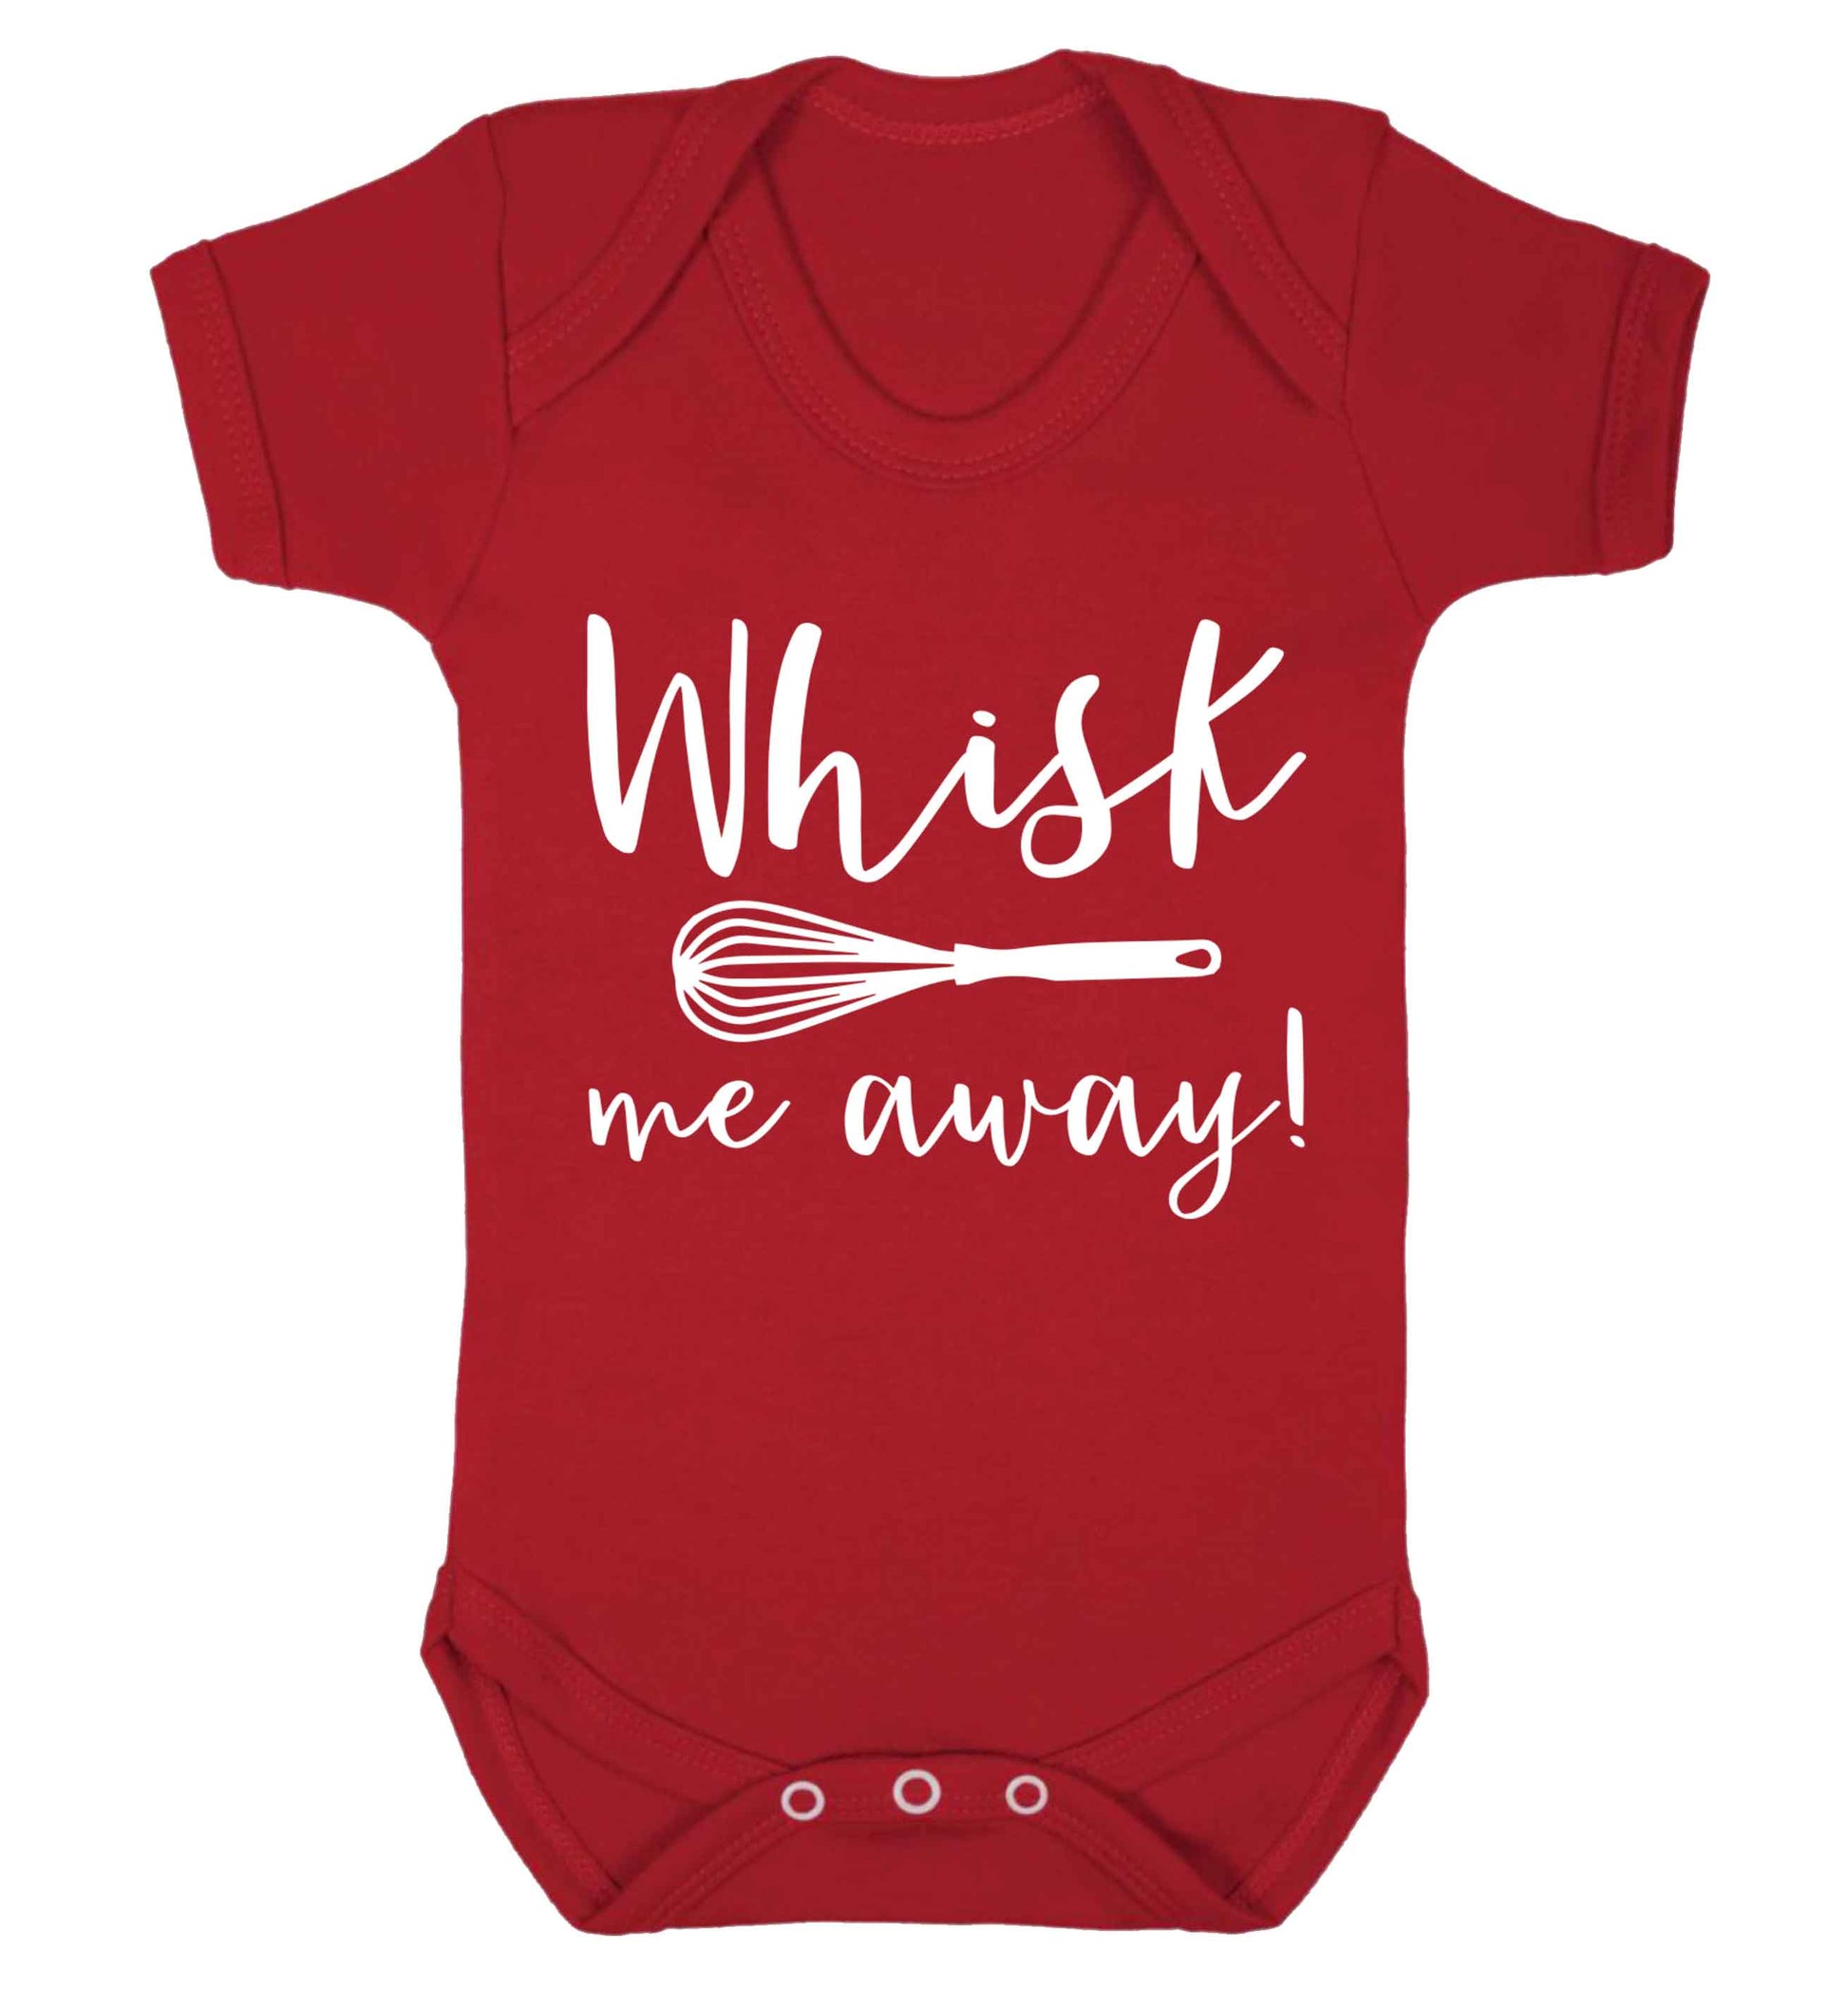 Whisk me away Baby Vest red 18-24 months